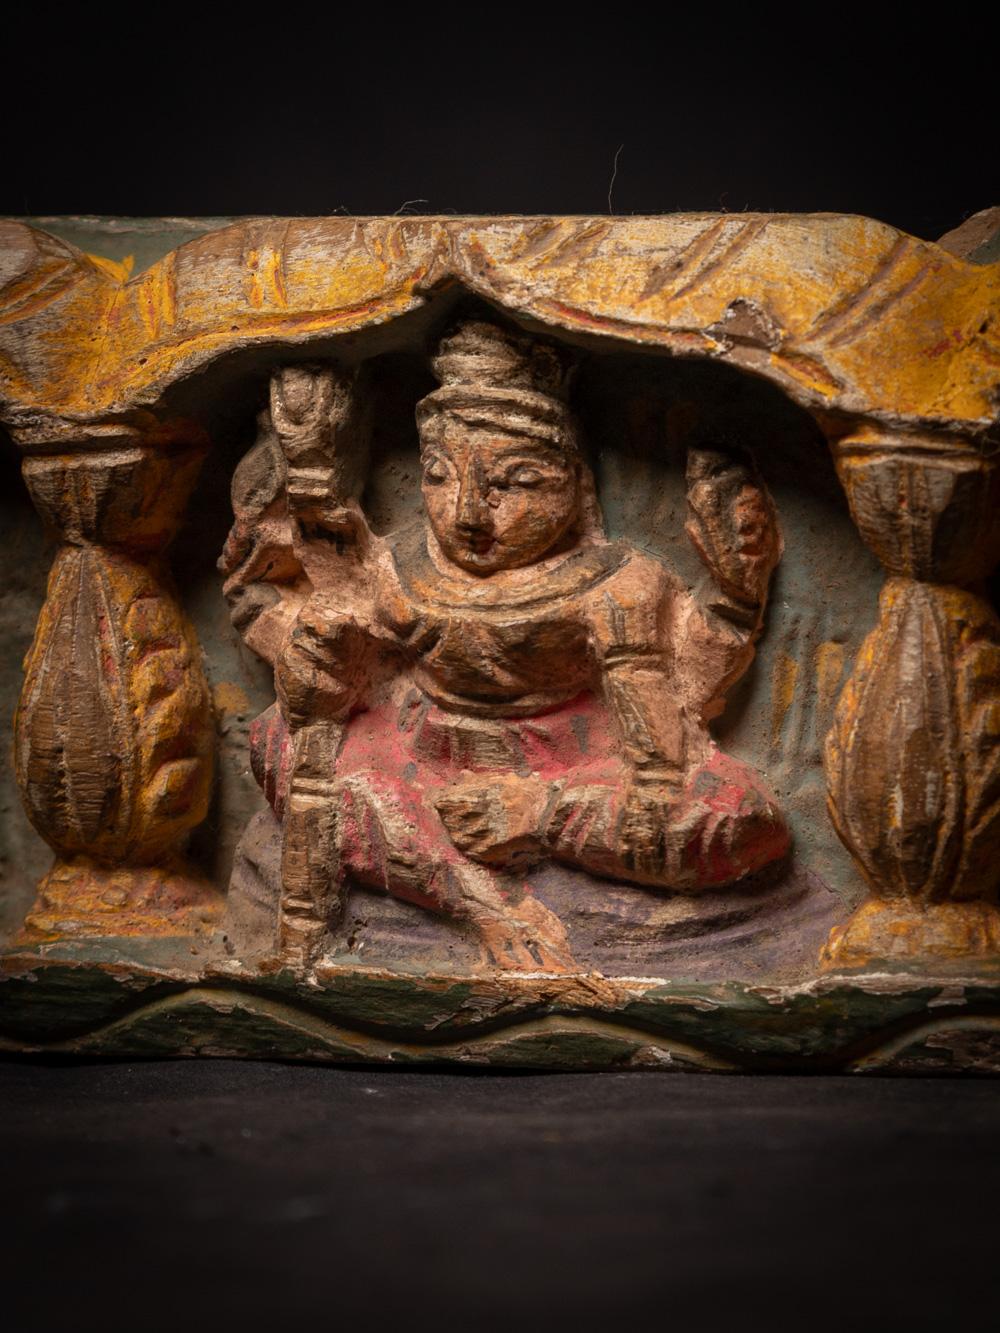 Middle 20th century old wooden panel with Indian god figures - Original Buddhas 8